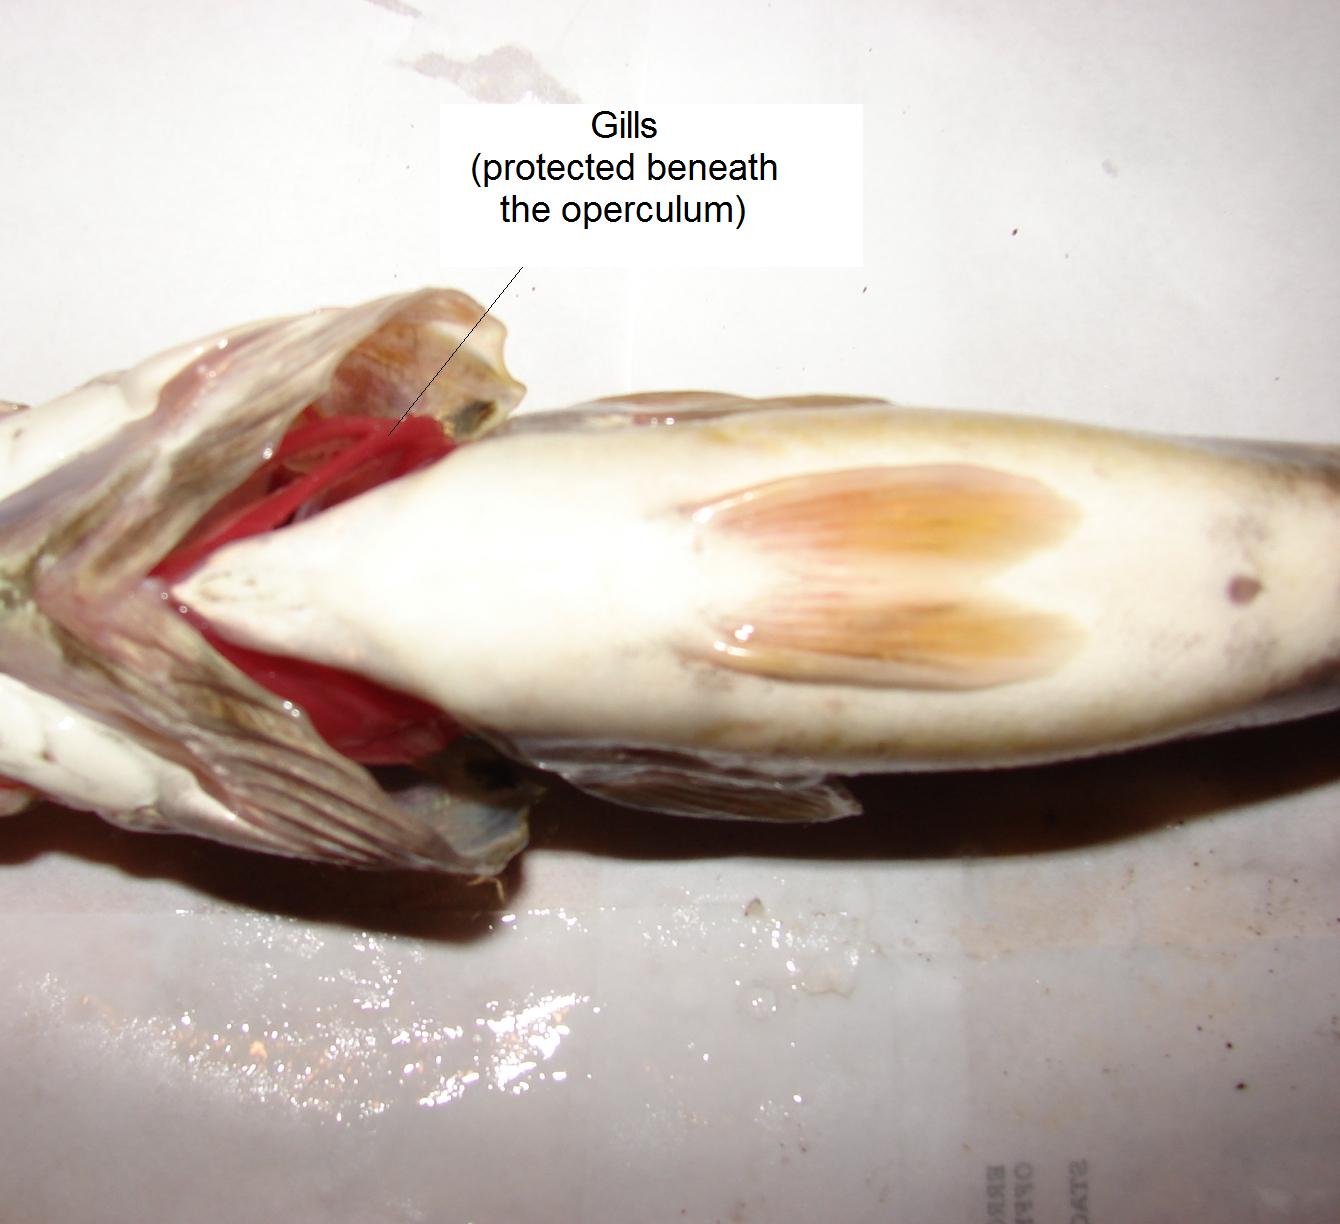 Ventral view of the gills beneath the operculi; I took this prior to dissection